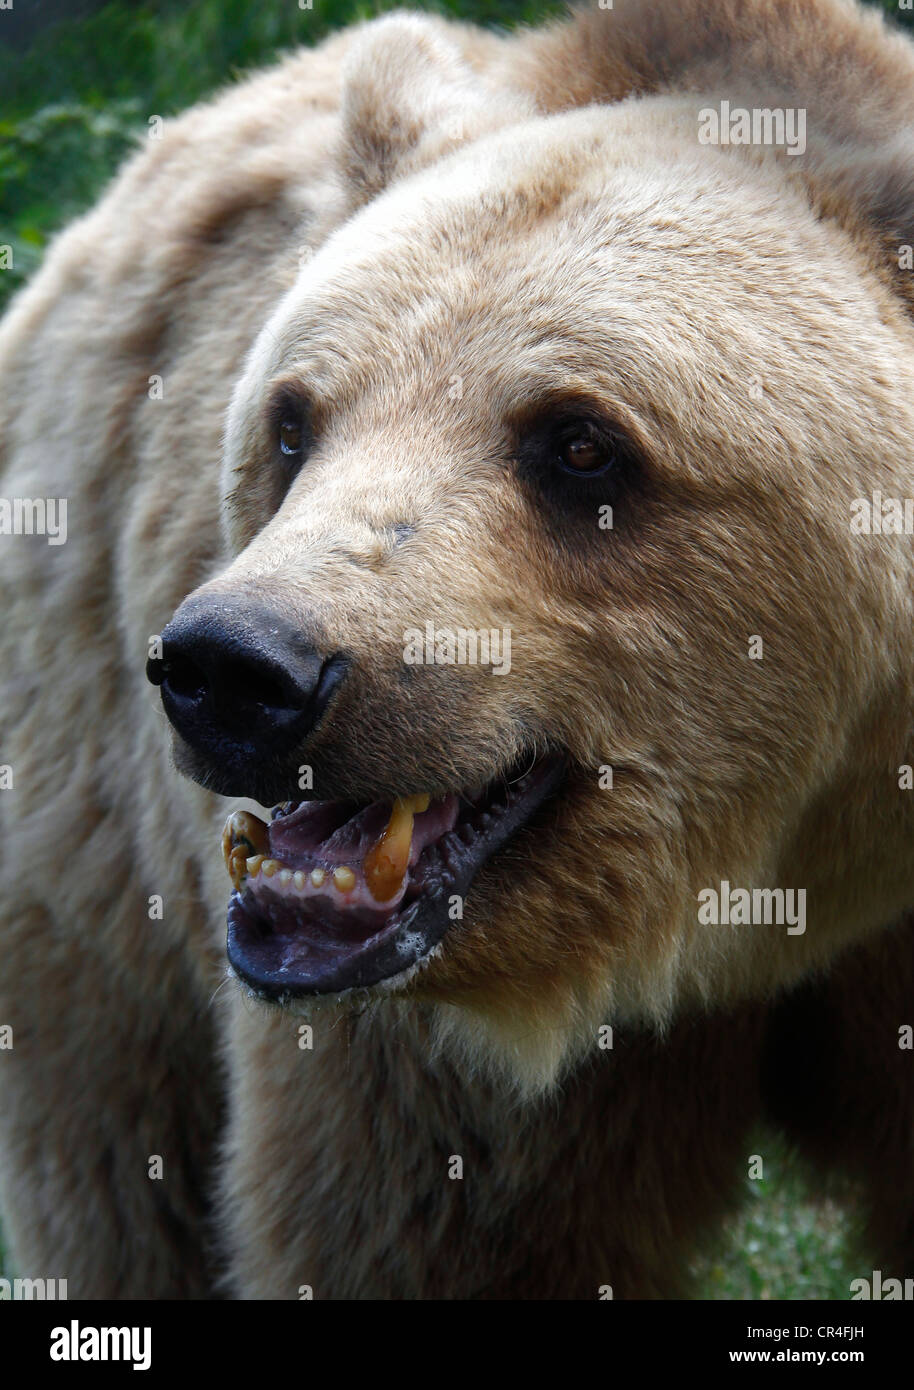 Brown bear watching angrily in the vicinity. Stock Photo